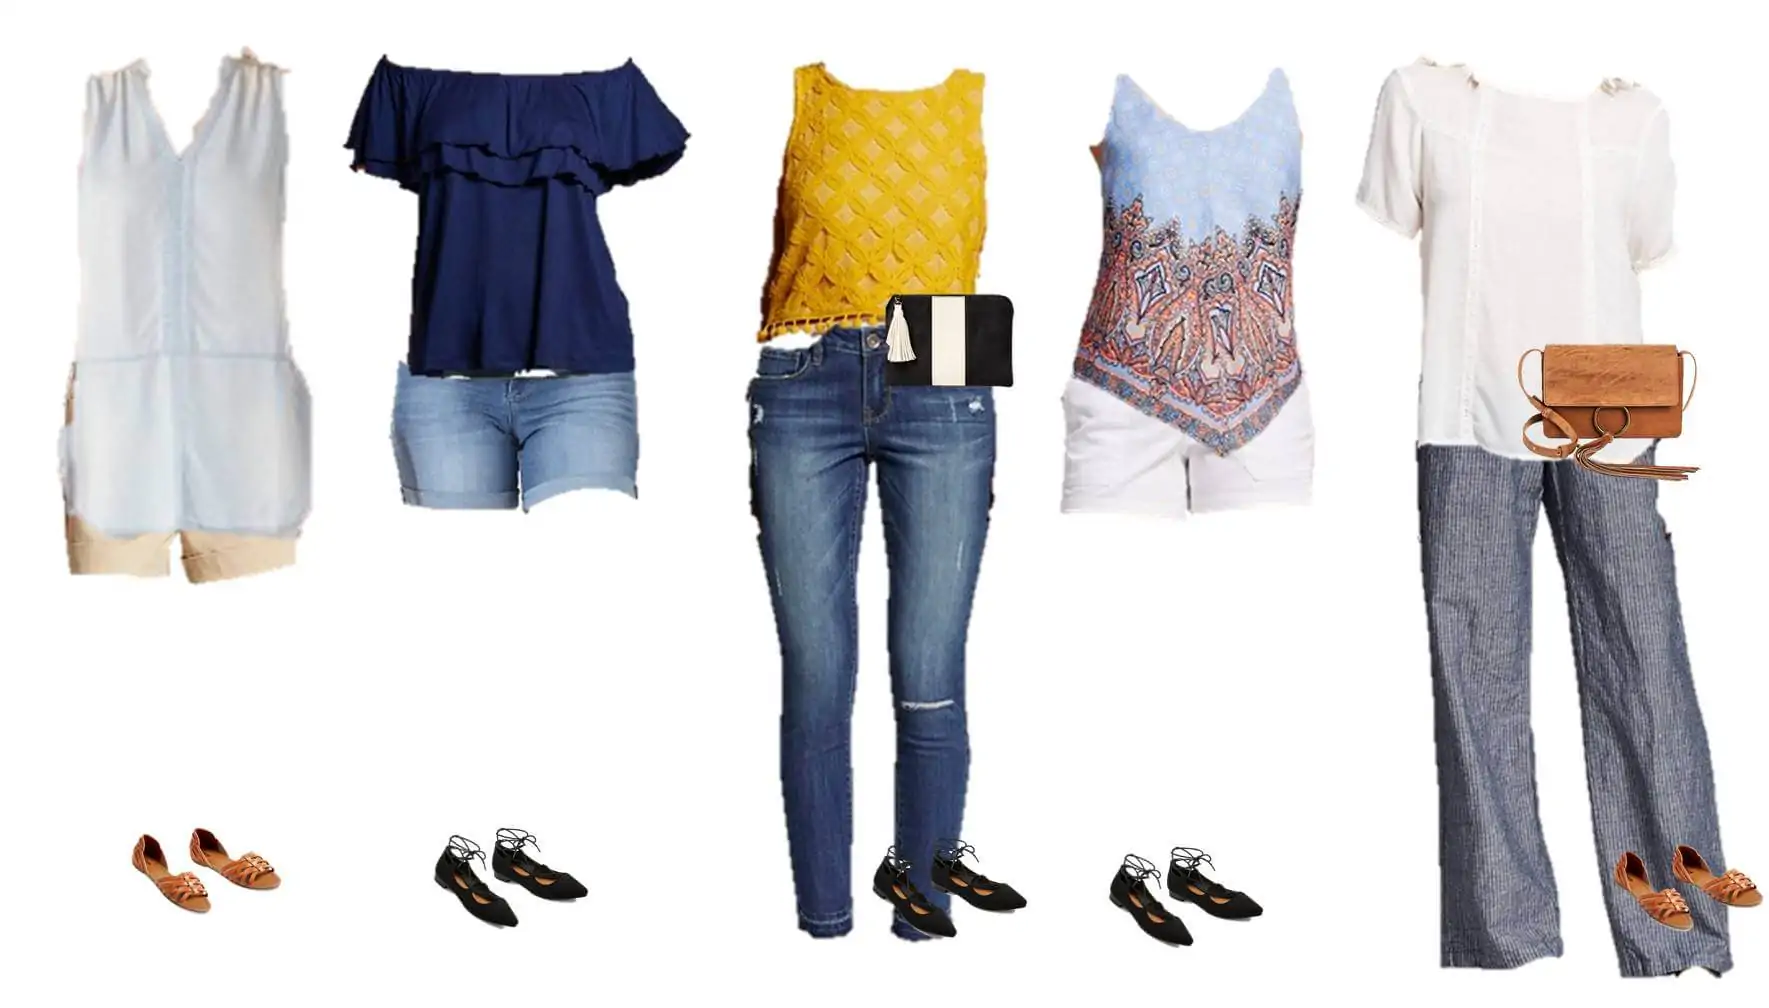 5.10 Mix and Match Fashion - Target Summer Styles 6-10